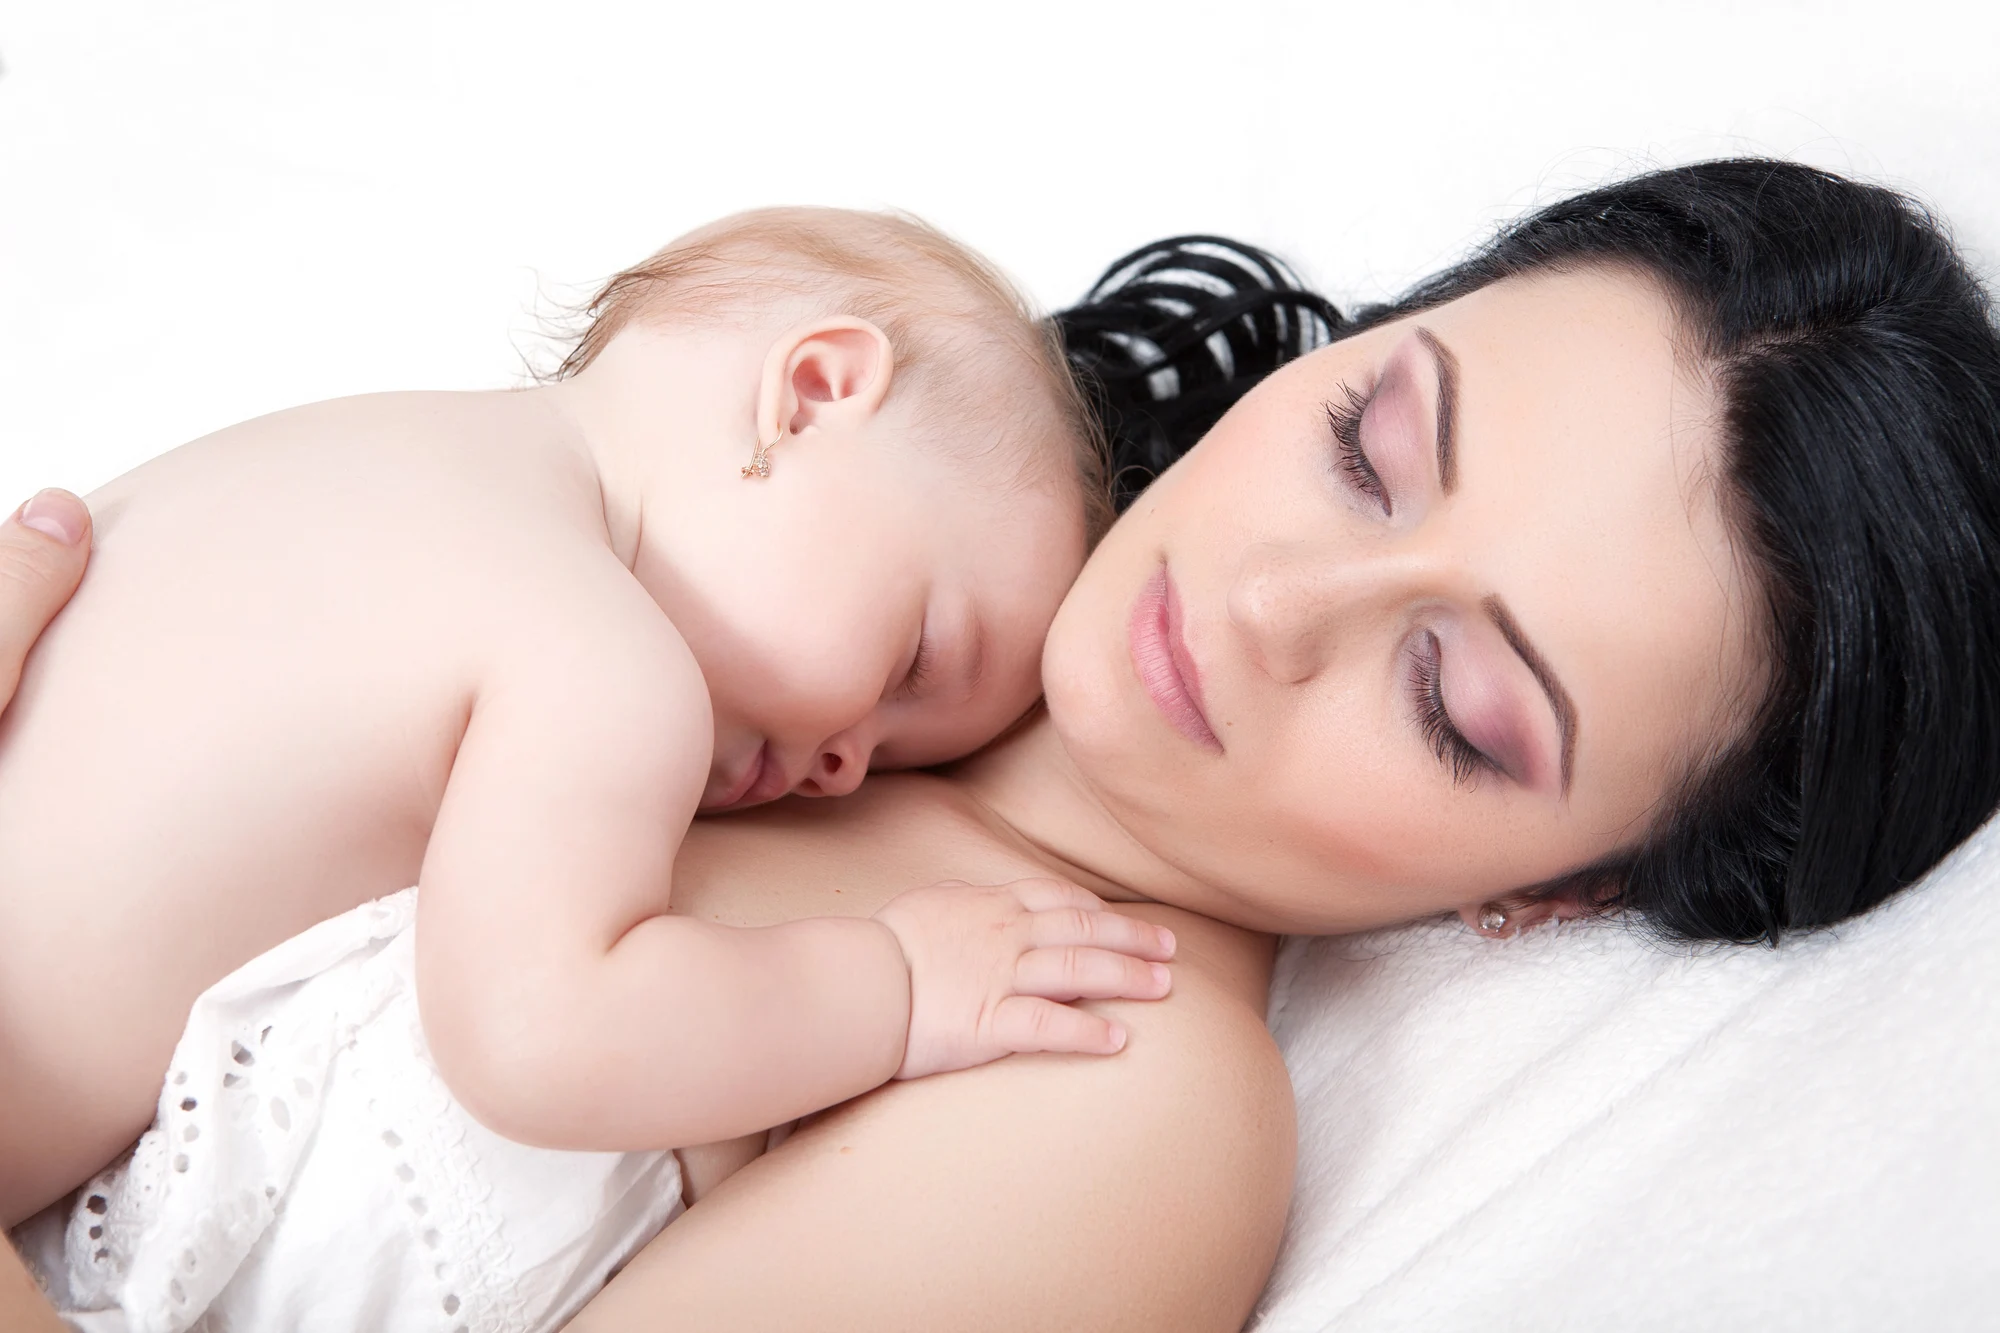 mother holding a baby, thinking about the safety of botox while breastfeeding